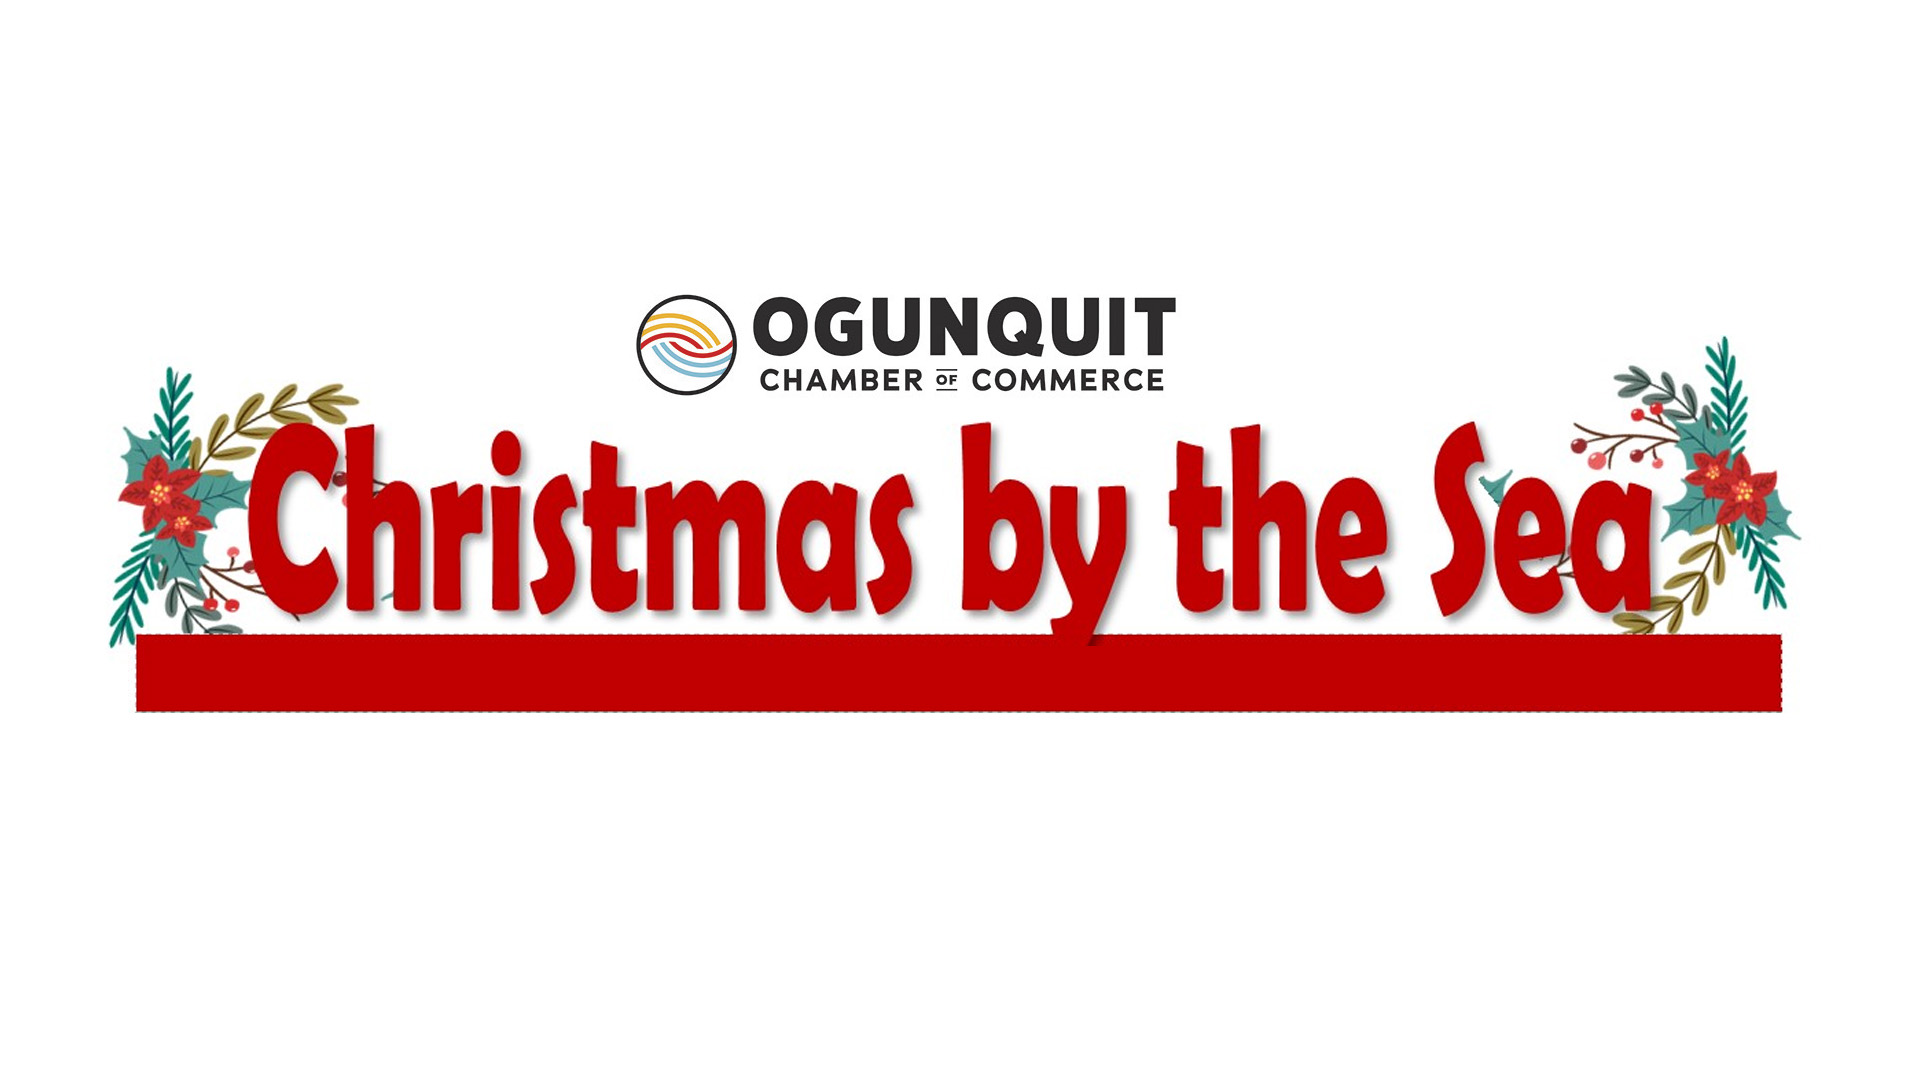 Ogunquit Christmas by the Sea